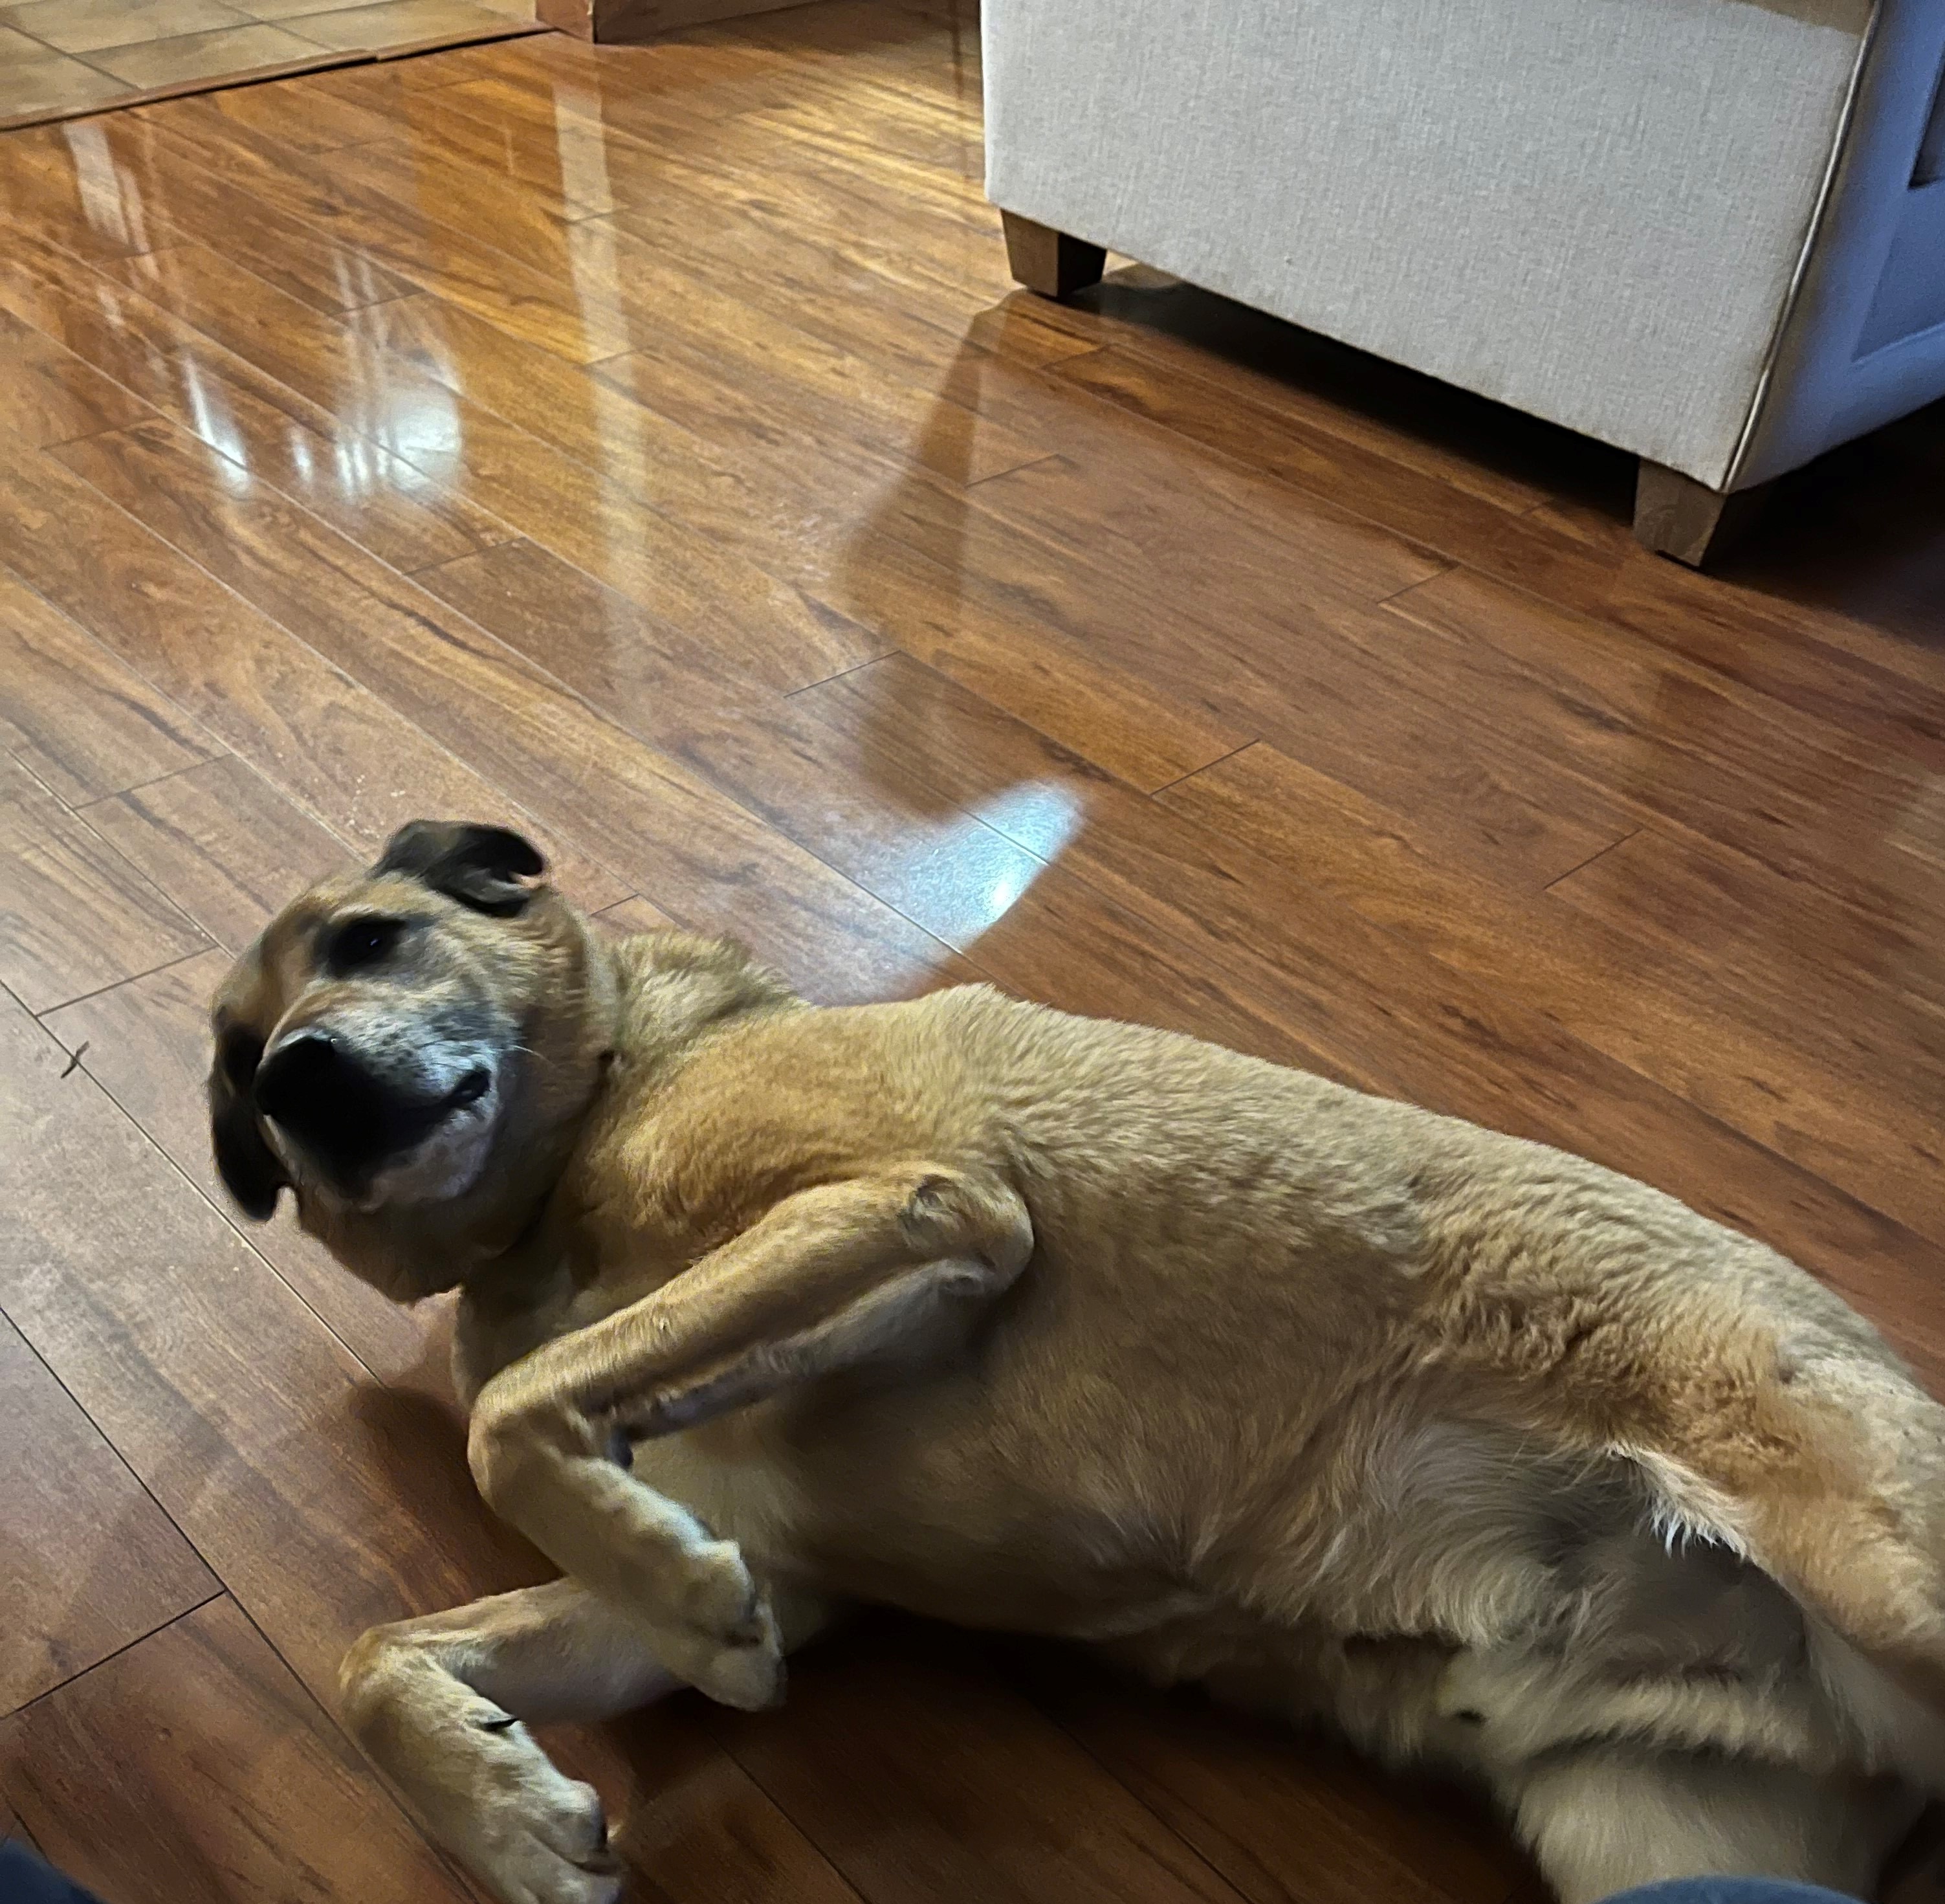 a brown dog laying down with his paws in a raptor position